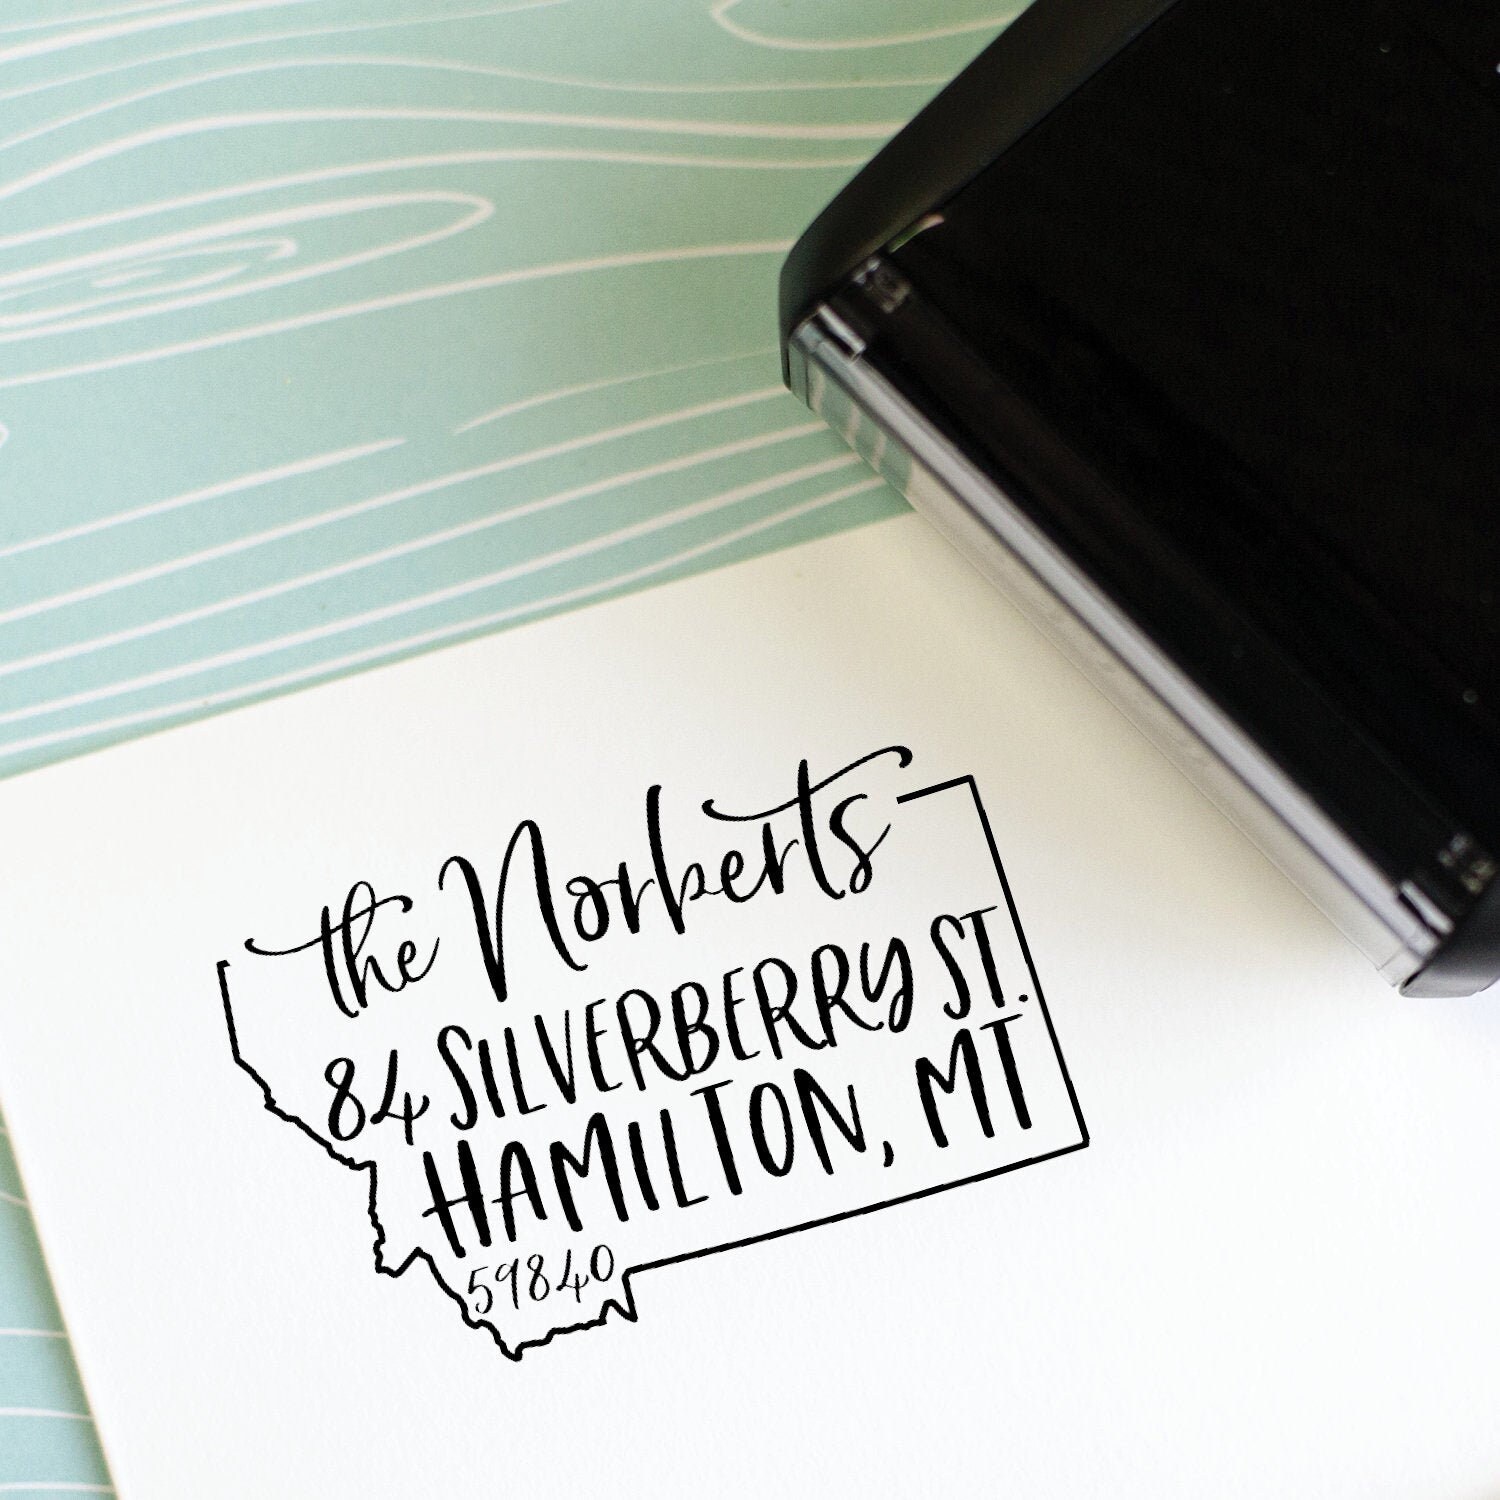 Address Stamp - Self Inking Return Address Stamp - rubber stamp - Custom  and Personalized Stamp, Housewarming gift